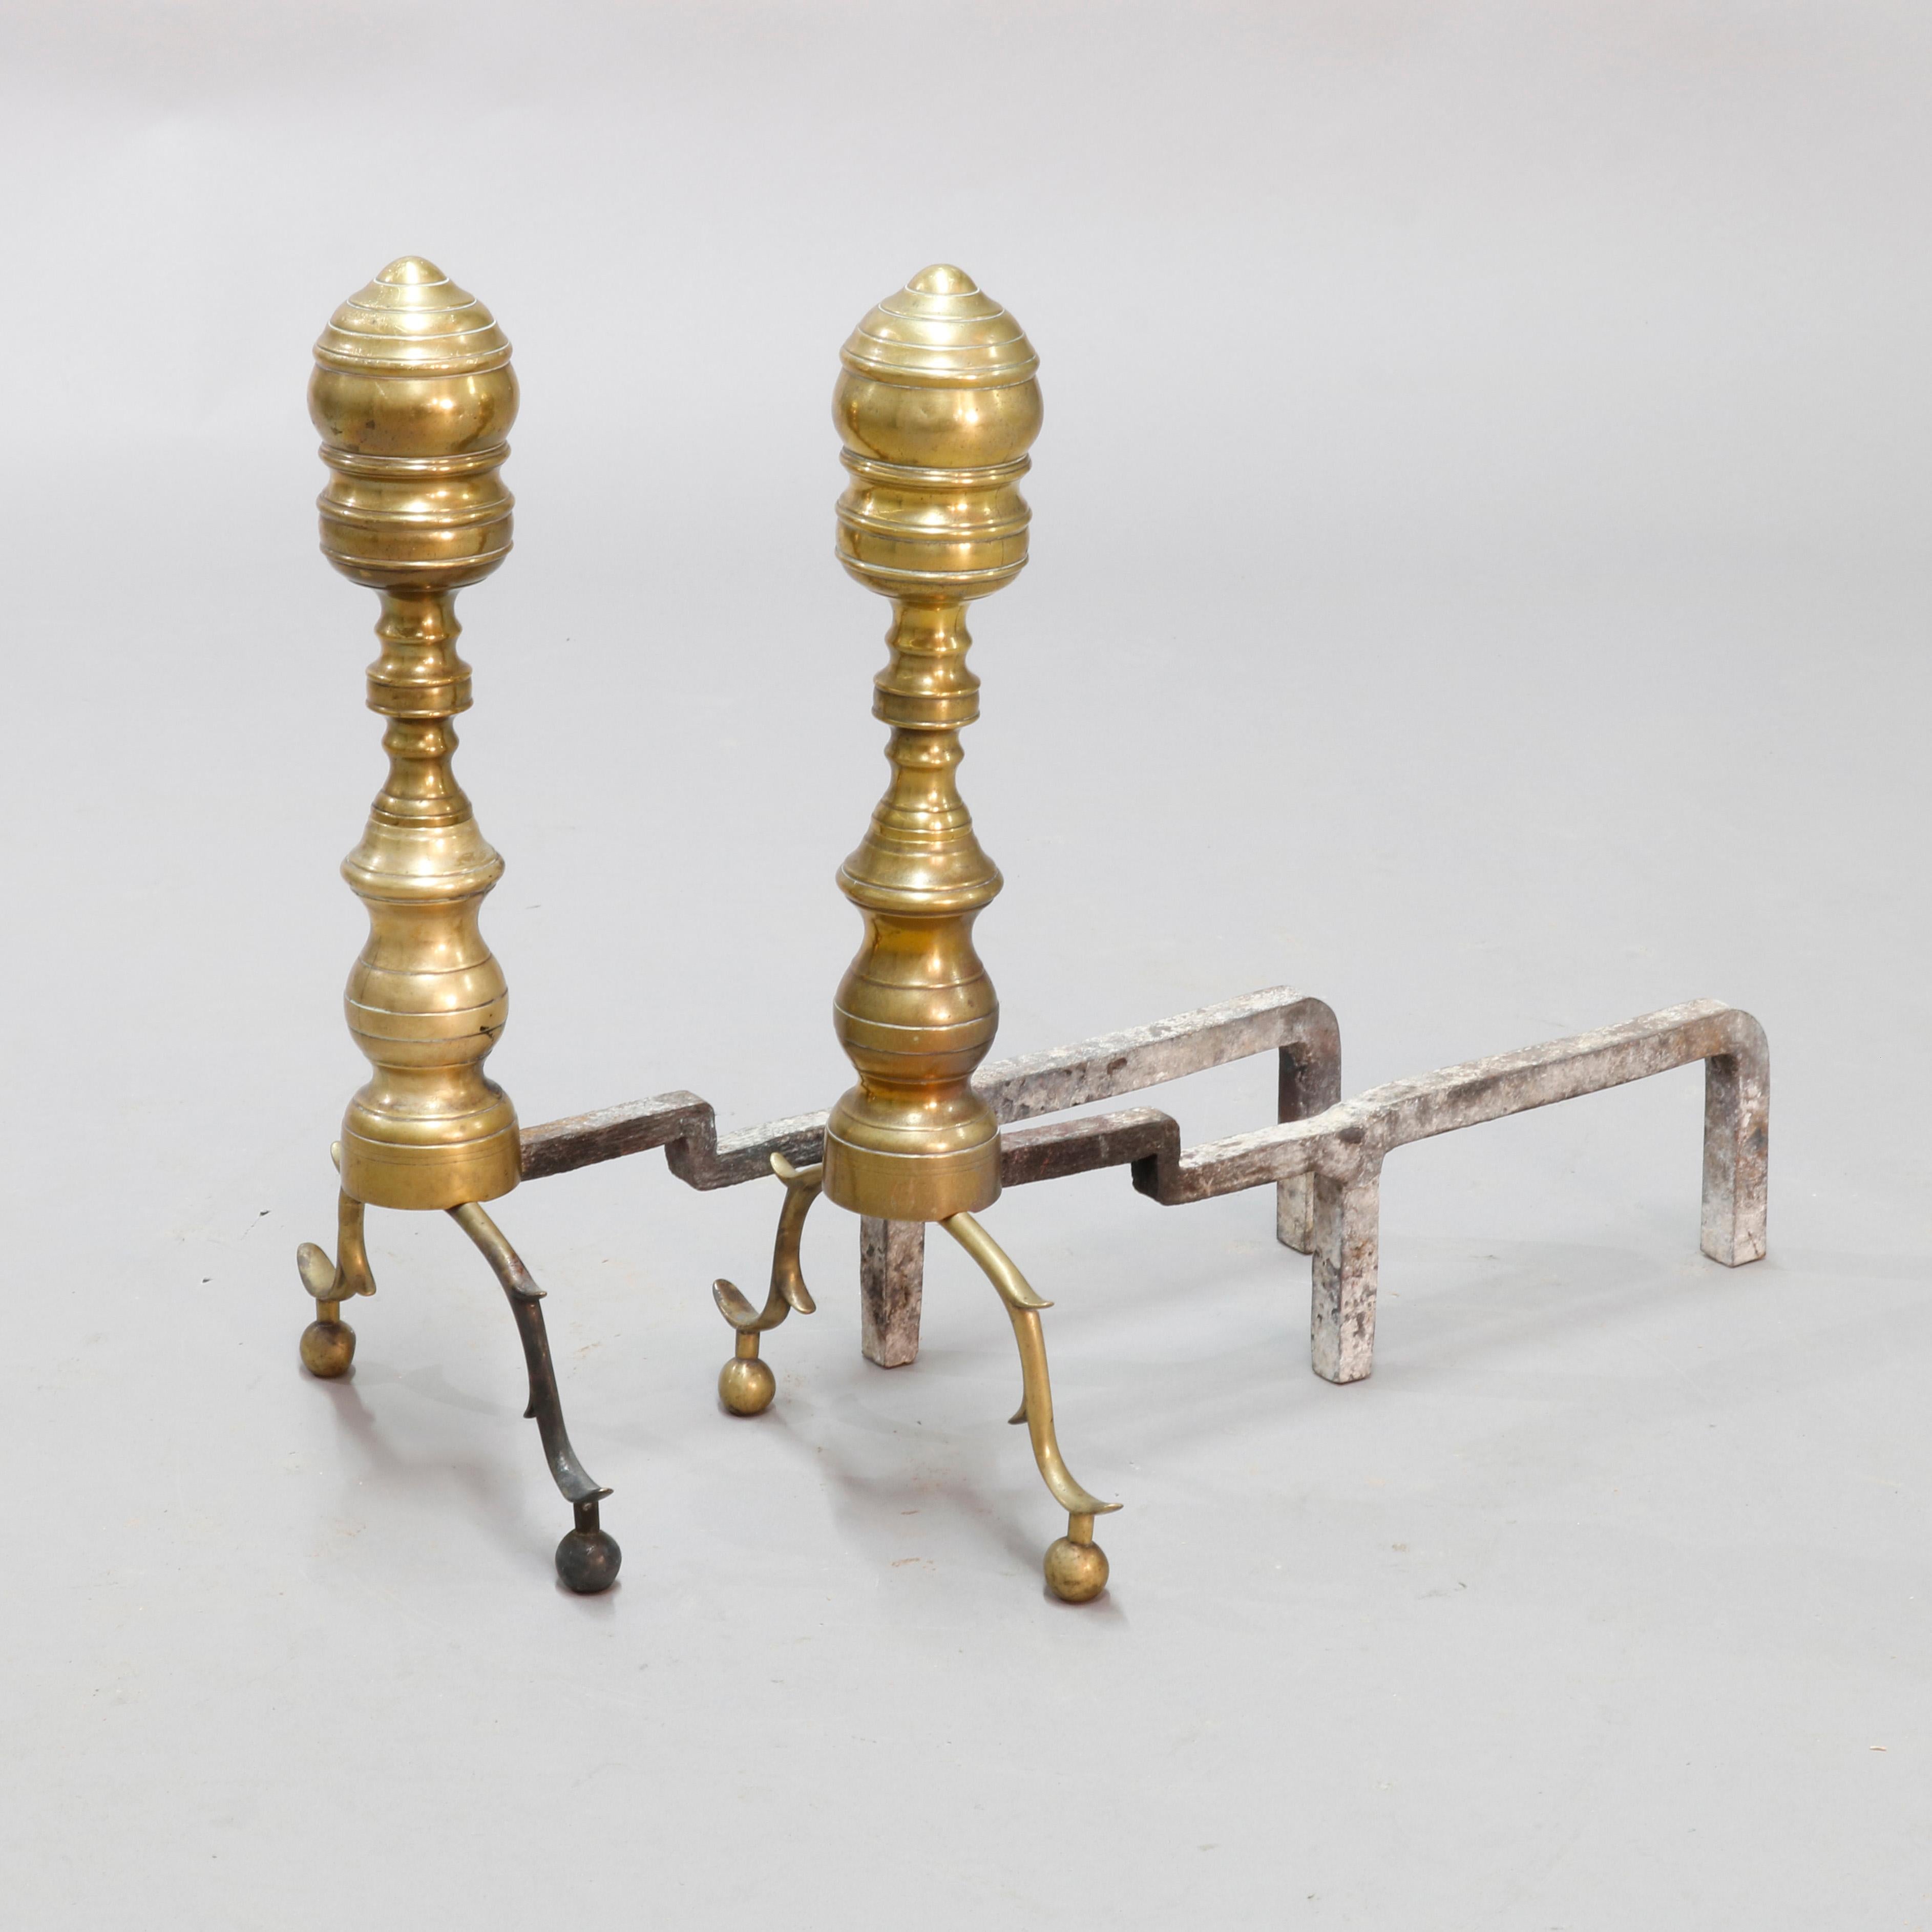 An antique set of early British Colonial andirons offer brass construction with beehive surmounting balustrade column and raised on foliate form cabriole legs terminating in ball feet, hand forged fire dogs, circa 1800.

Measures: 17.5